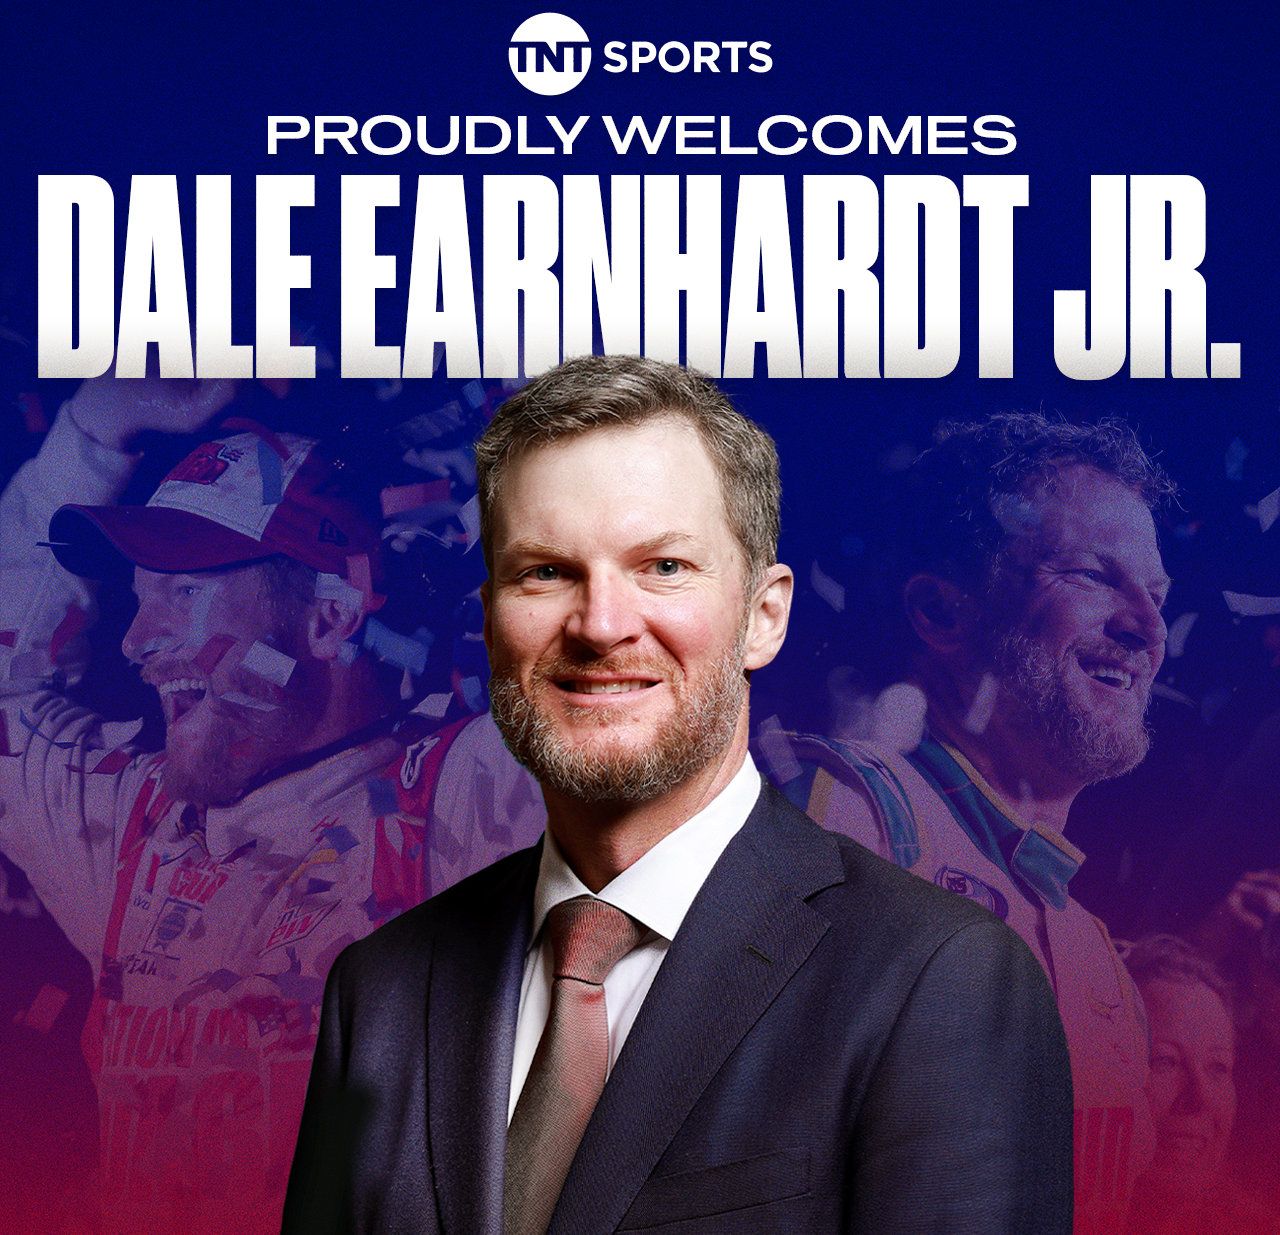 Prime Video Welcomes Dale Earnhardt Jr. to its NASCAR Broadcast Booth